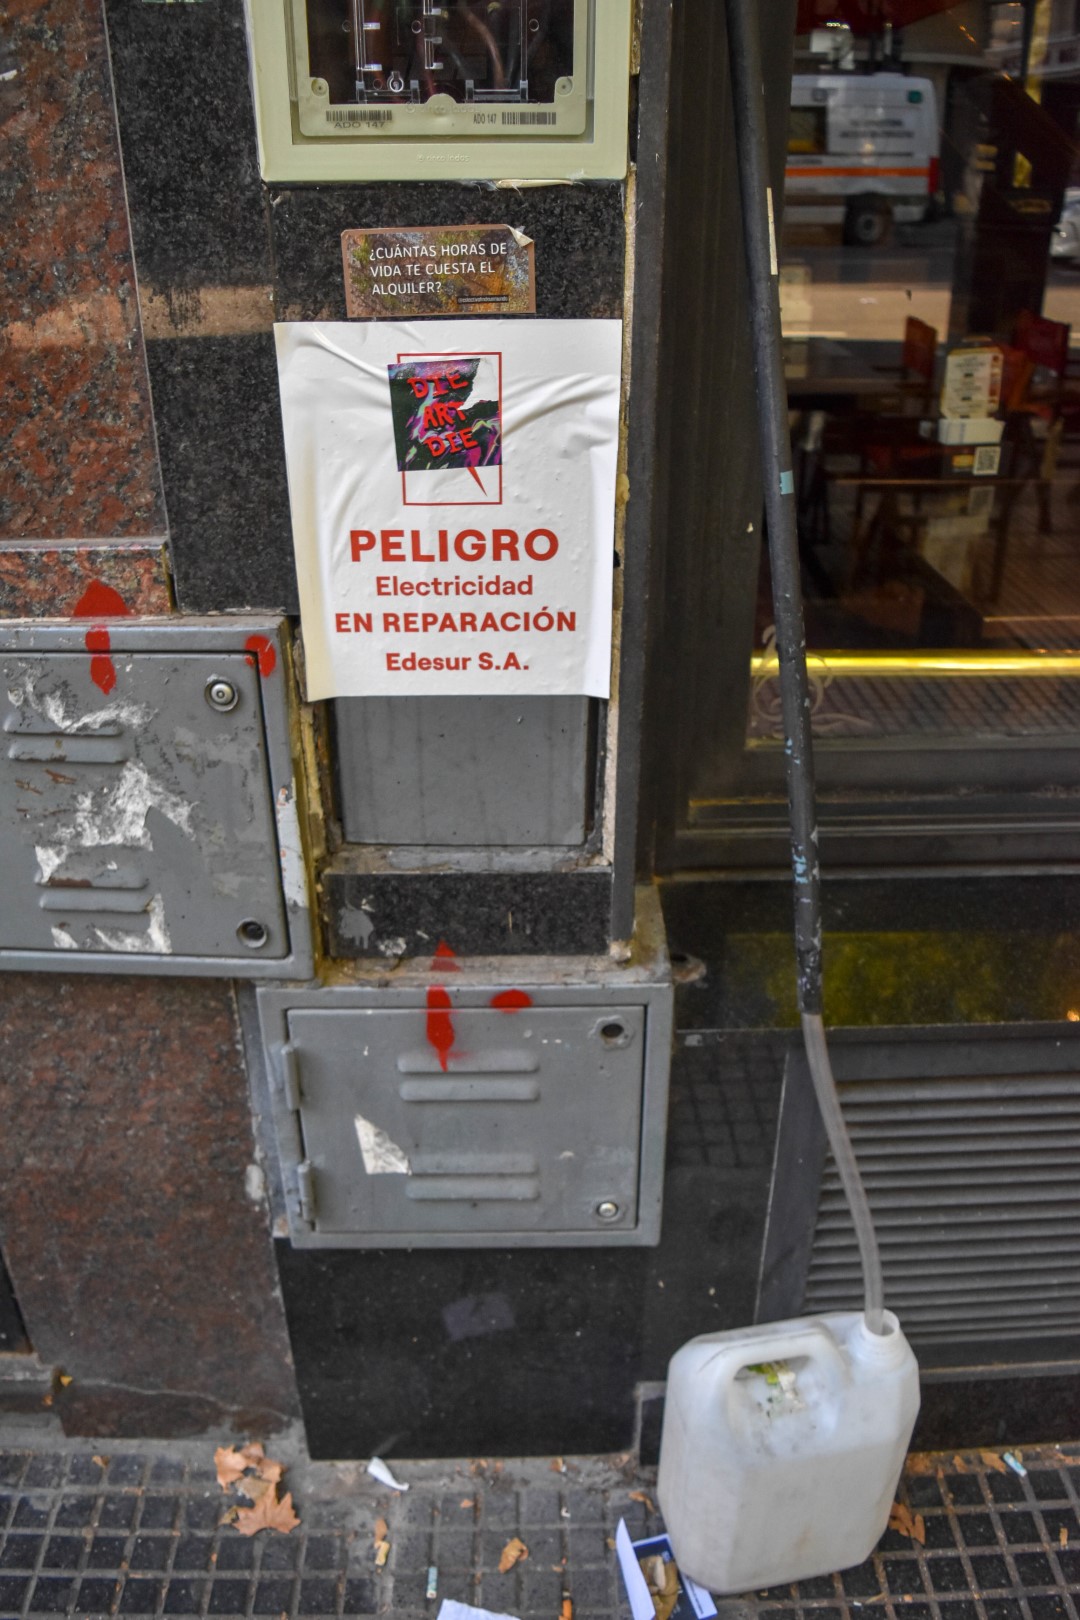 Electricity being fixed... saw that all over Buenos Aires